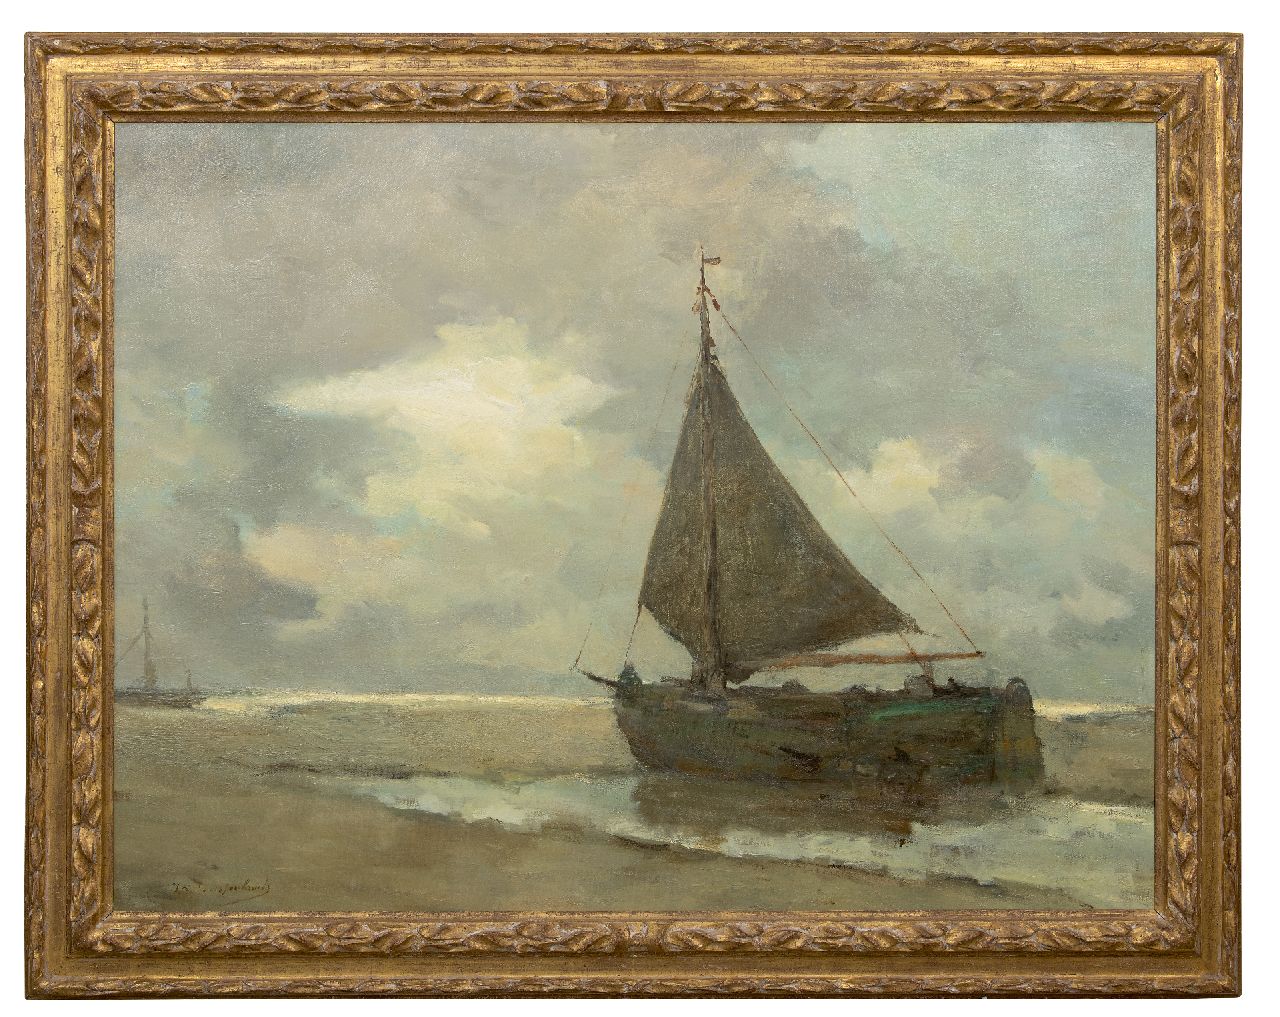 Weissenbruch H.J.  | Hendrik Johannes 'J.H.' Weissenbruch | Paintings offered for sale | Ship on the beach of Zeeland, oil on canvas 102.3 x 135.8 cm, signed l.l.